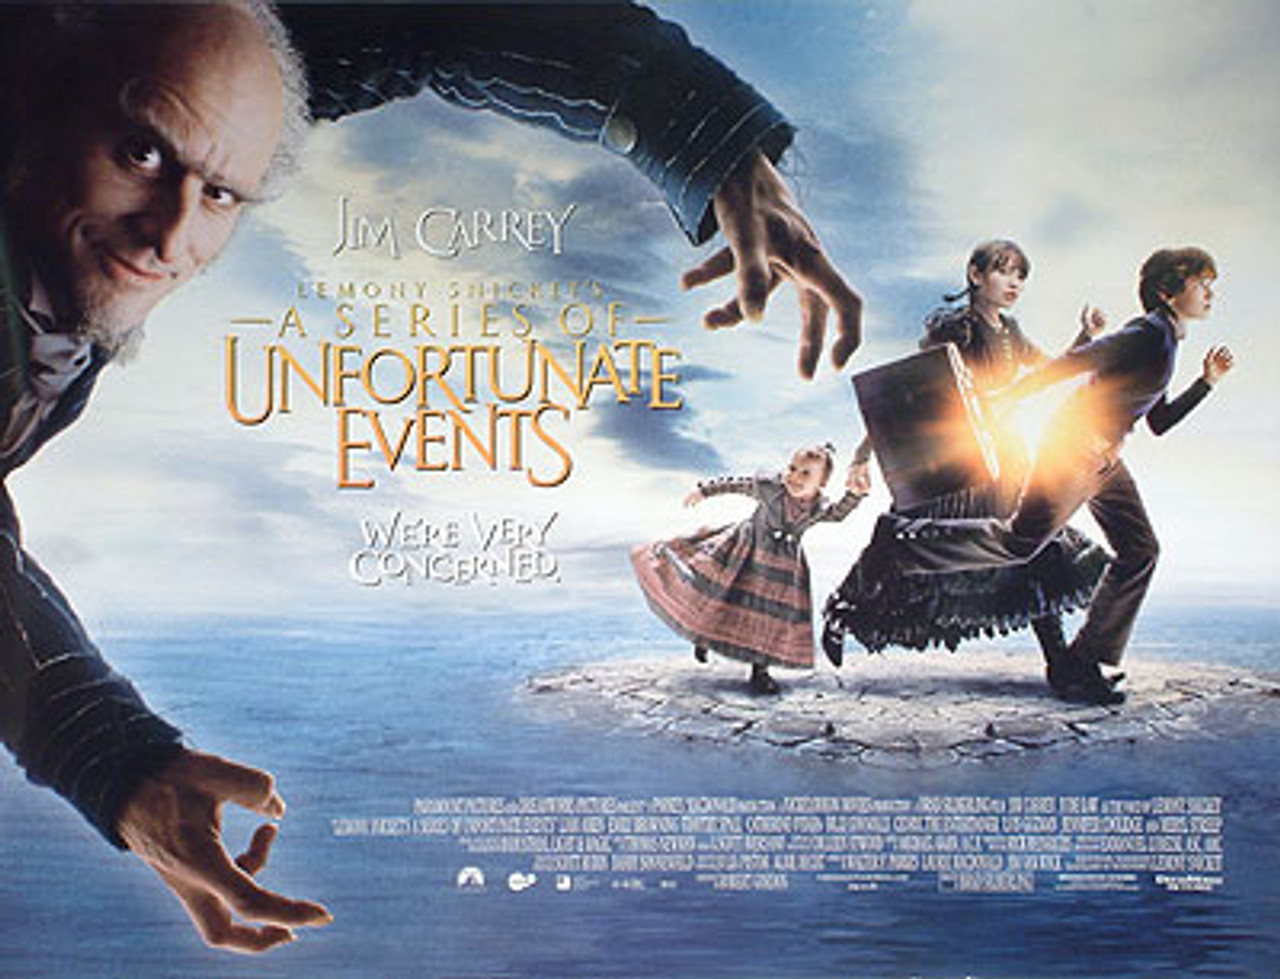 LEMONY SNICKET'S A SERIES OF UNFORTUNATE EVENTS (SINGLE SIDED) POSTER